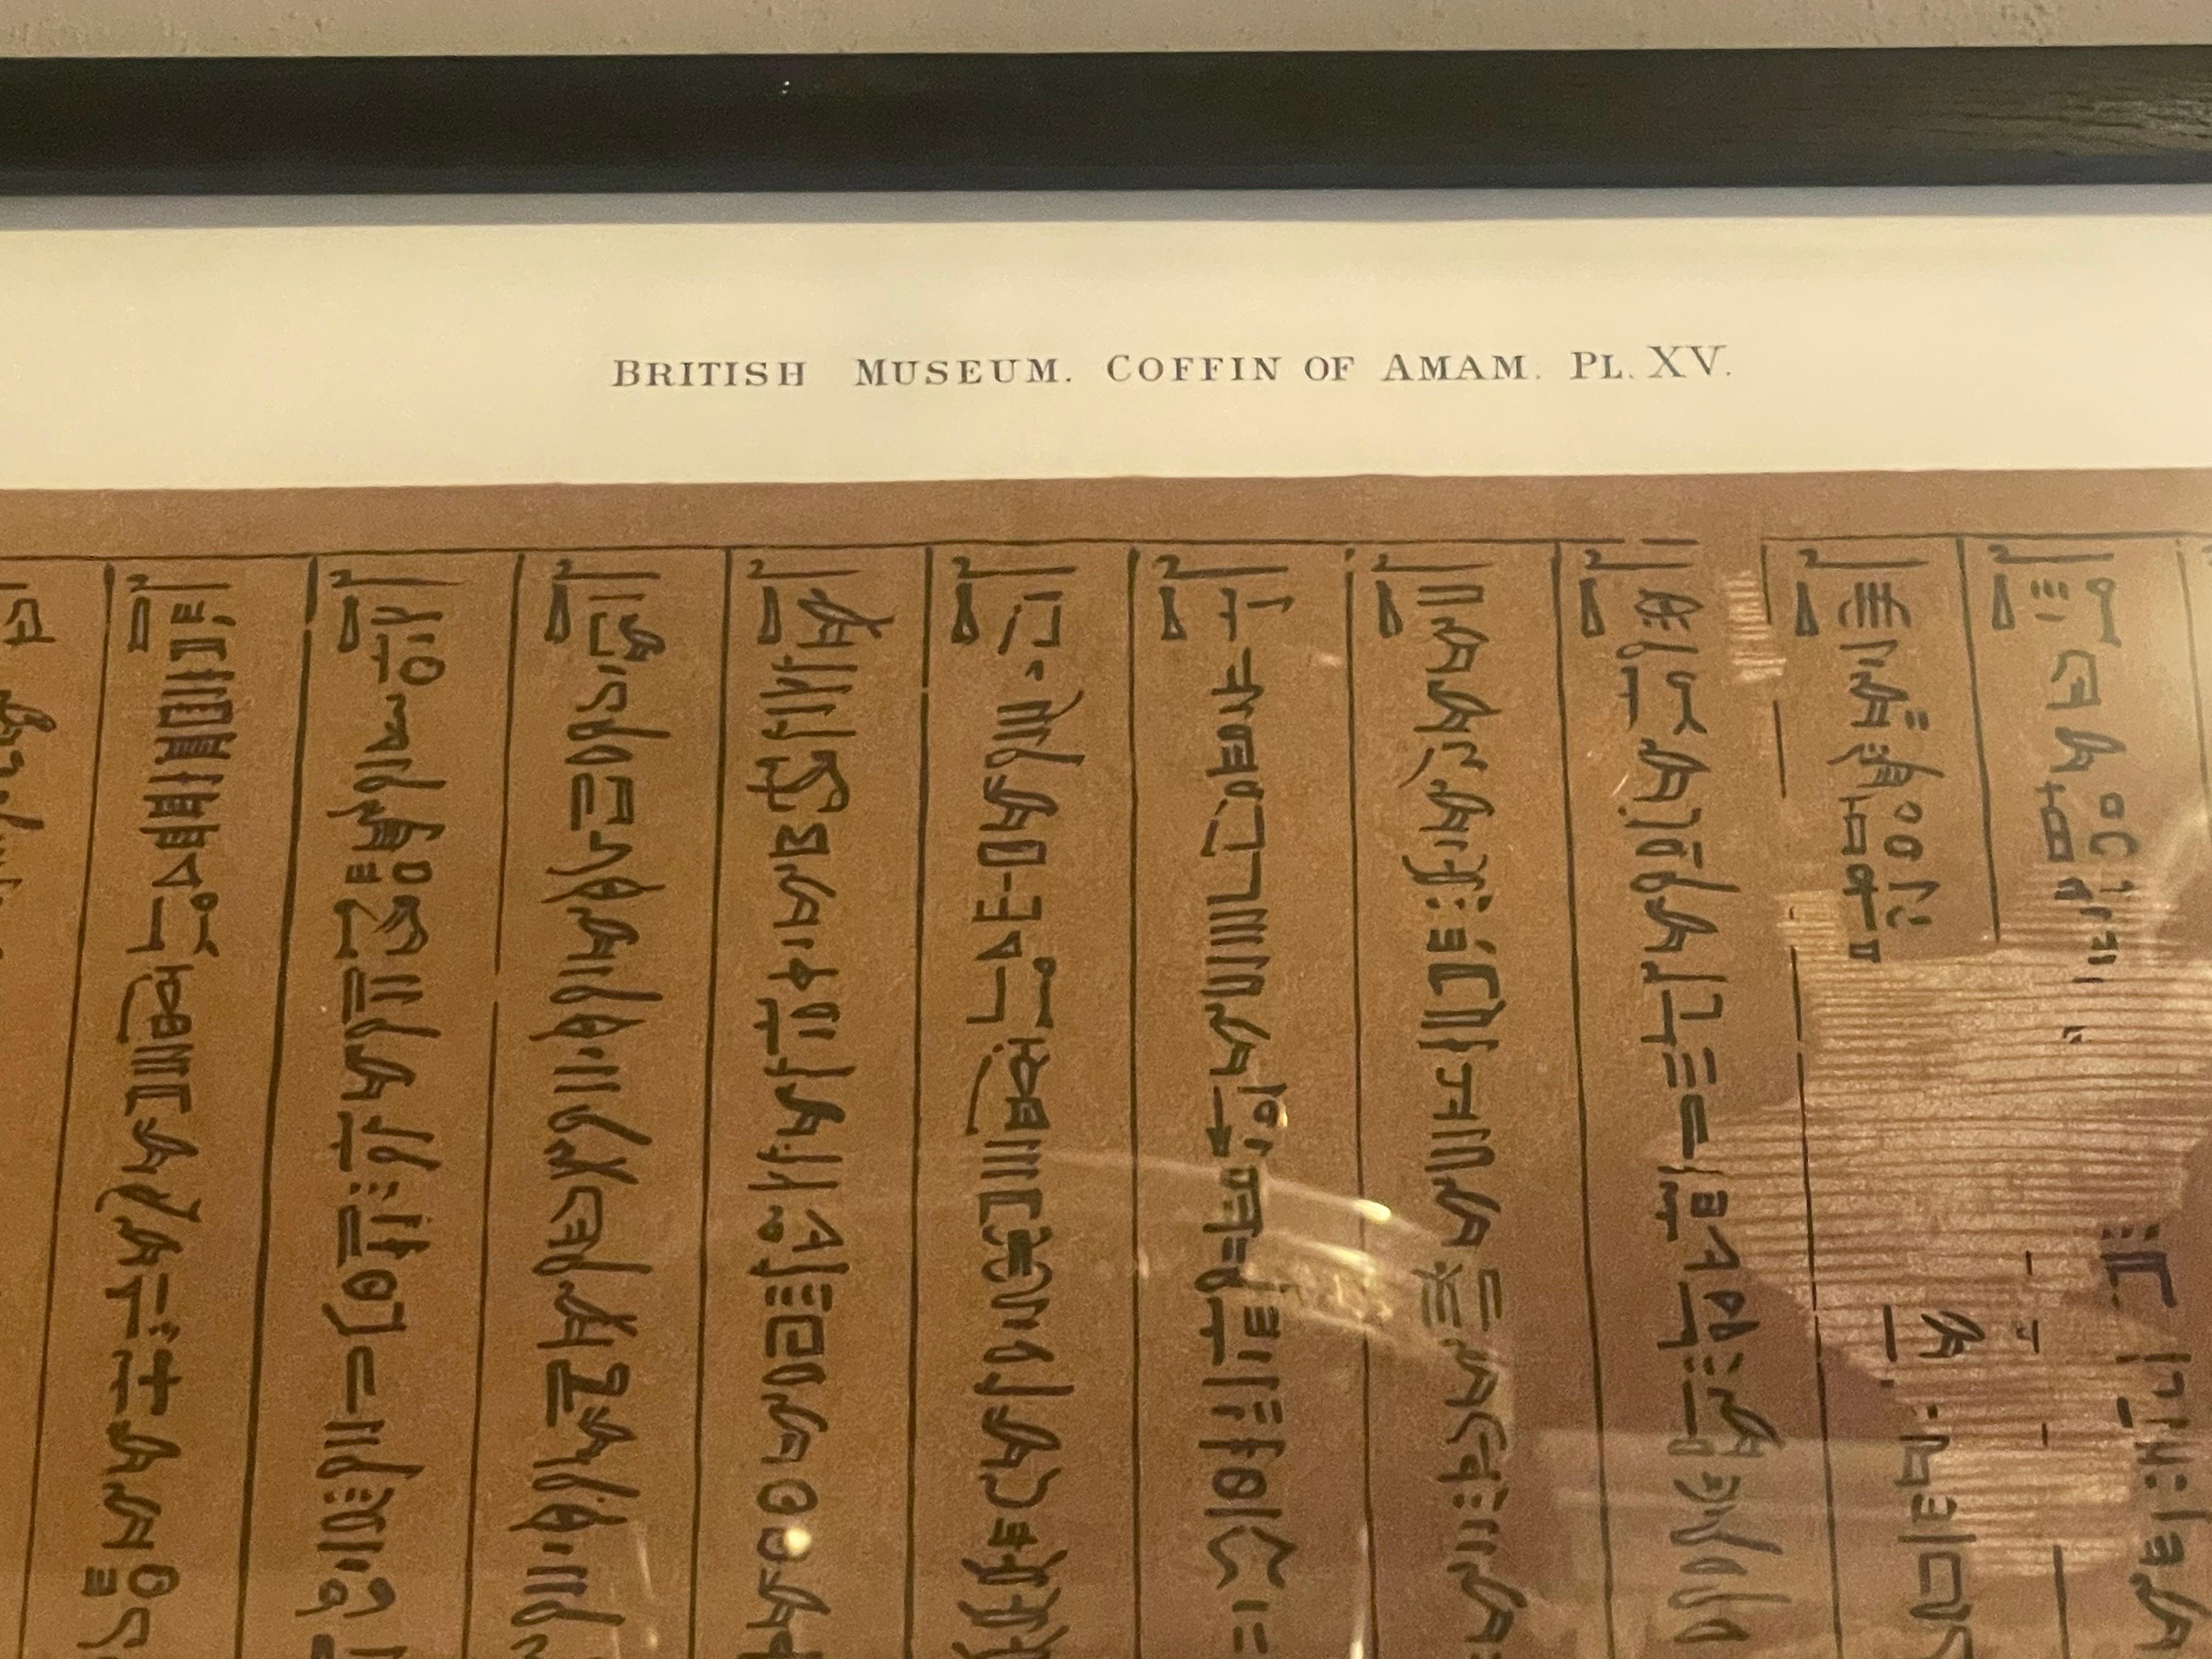 Set 4 Framed Prints of Ancient Egyptian Hieroglyphs, British Museum, circa 1886 For Sale 2